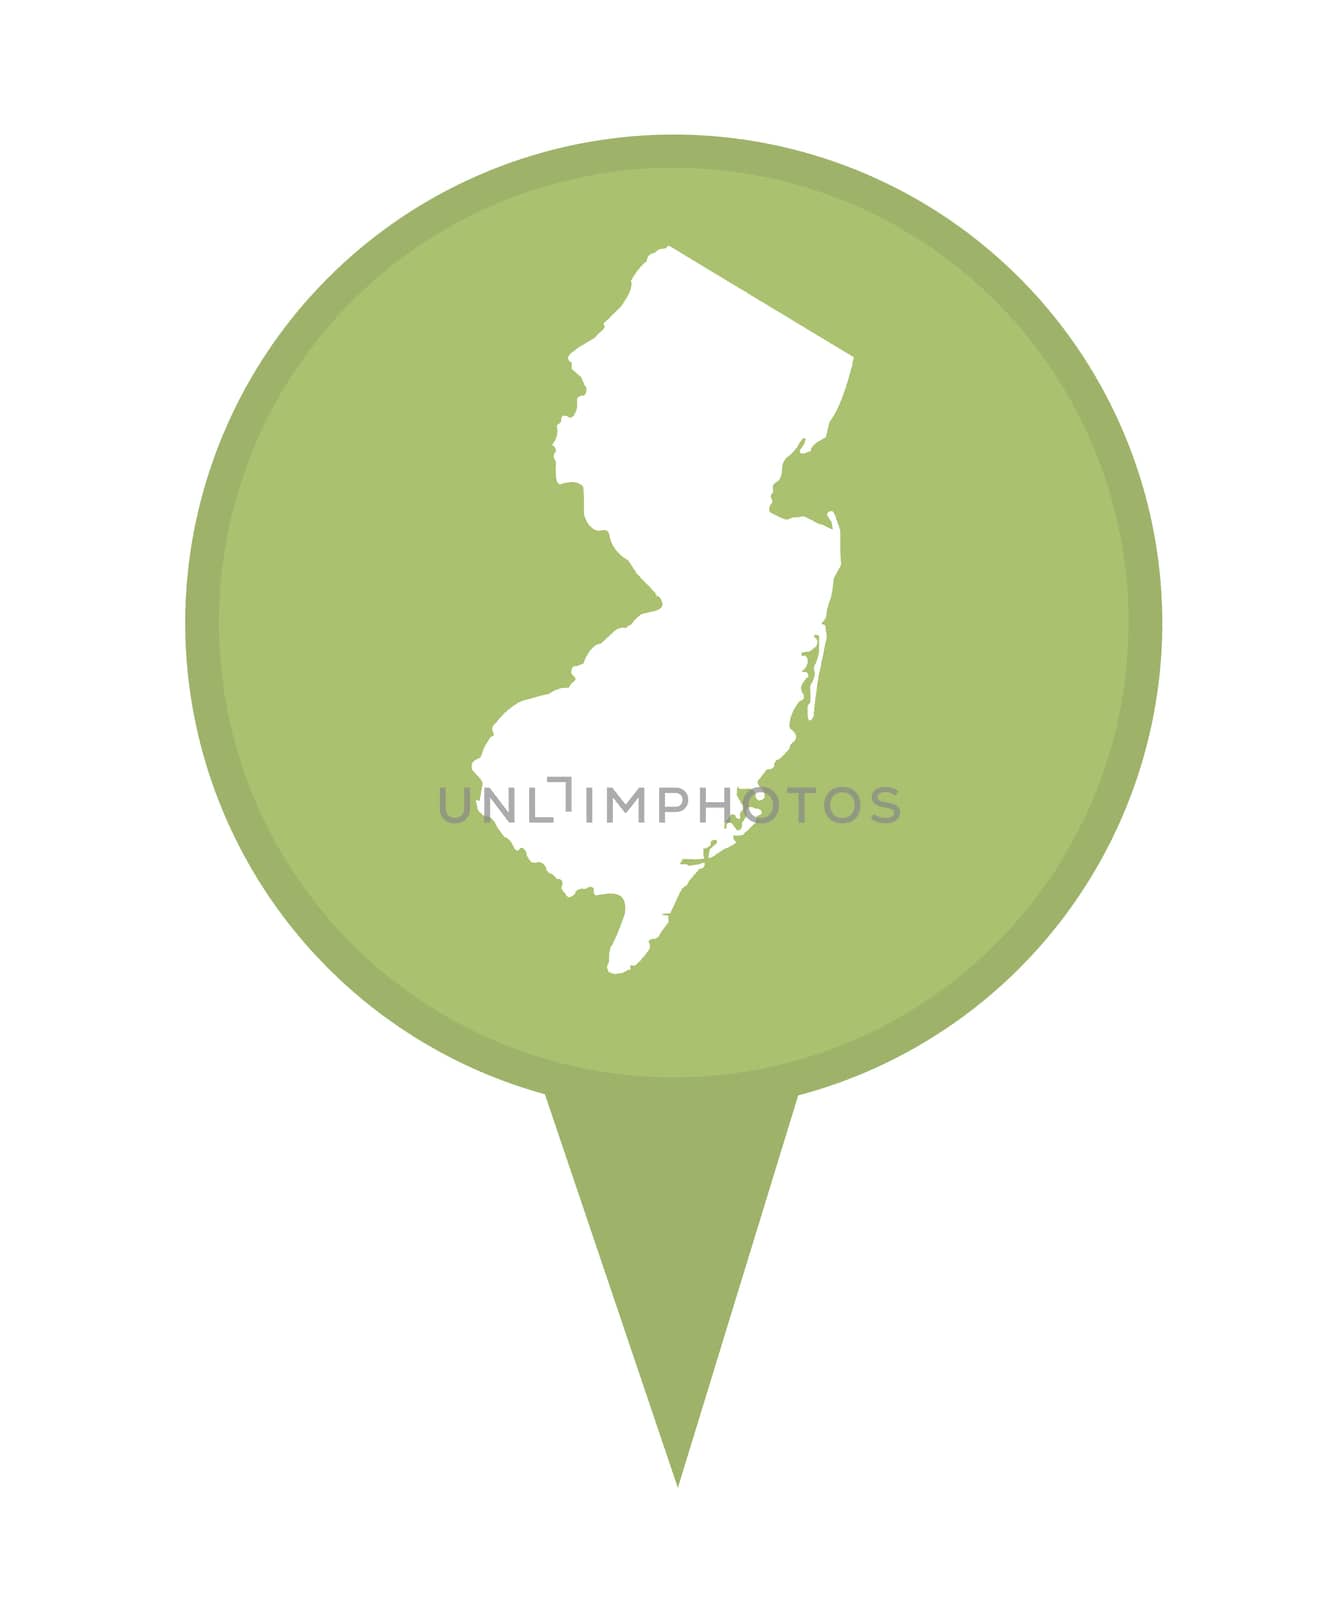 American state of New Jersey marker pin isolated on a white background.